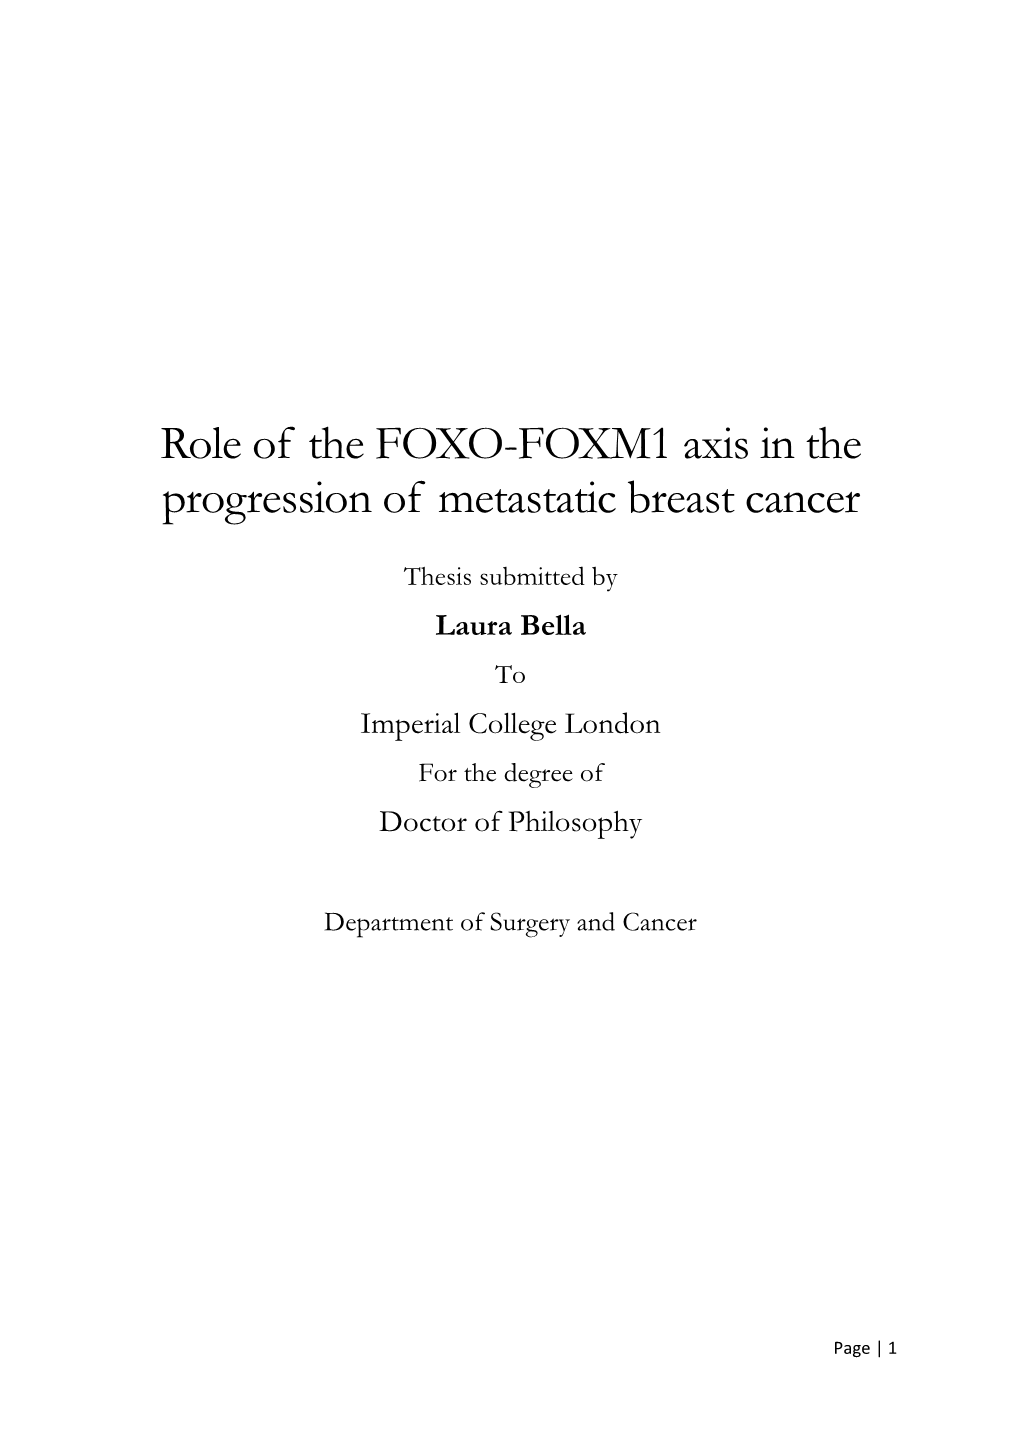 Role of the FOXO-FOXM1 Axis in the Progression of Metastatic Breast Cancer